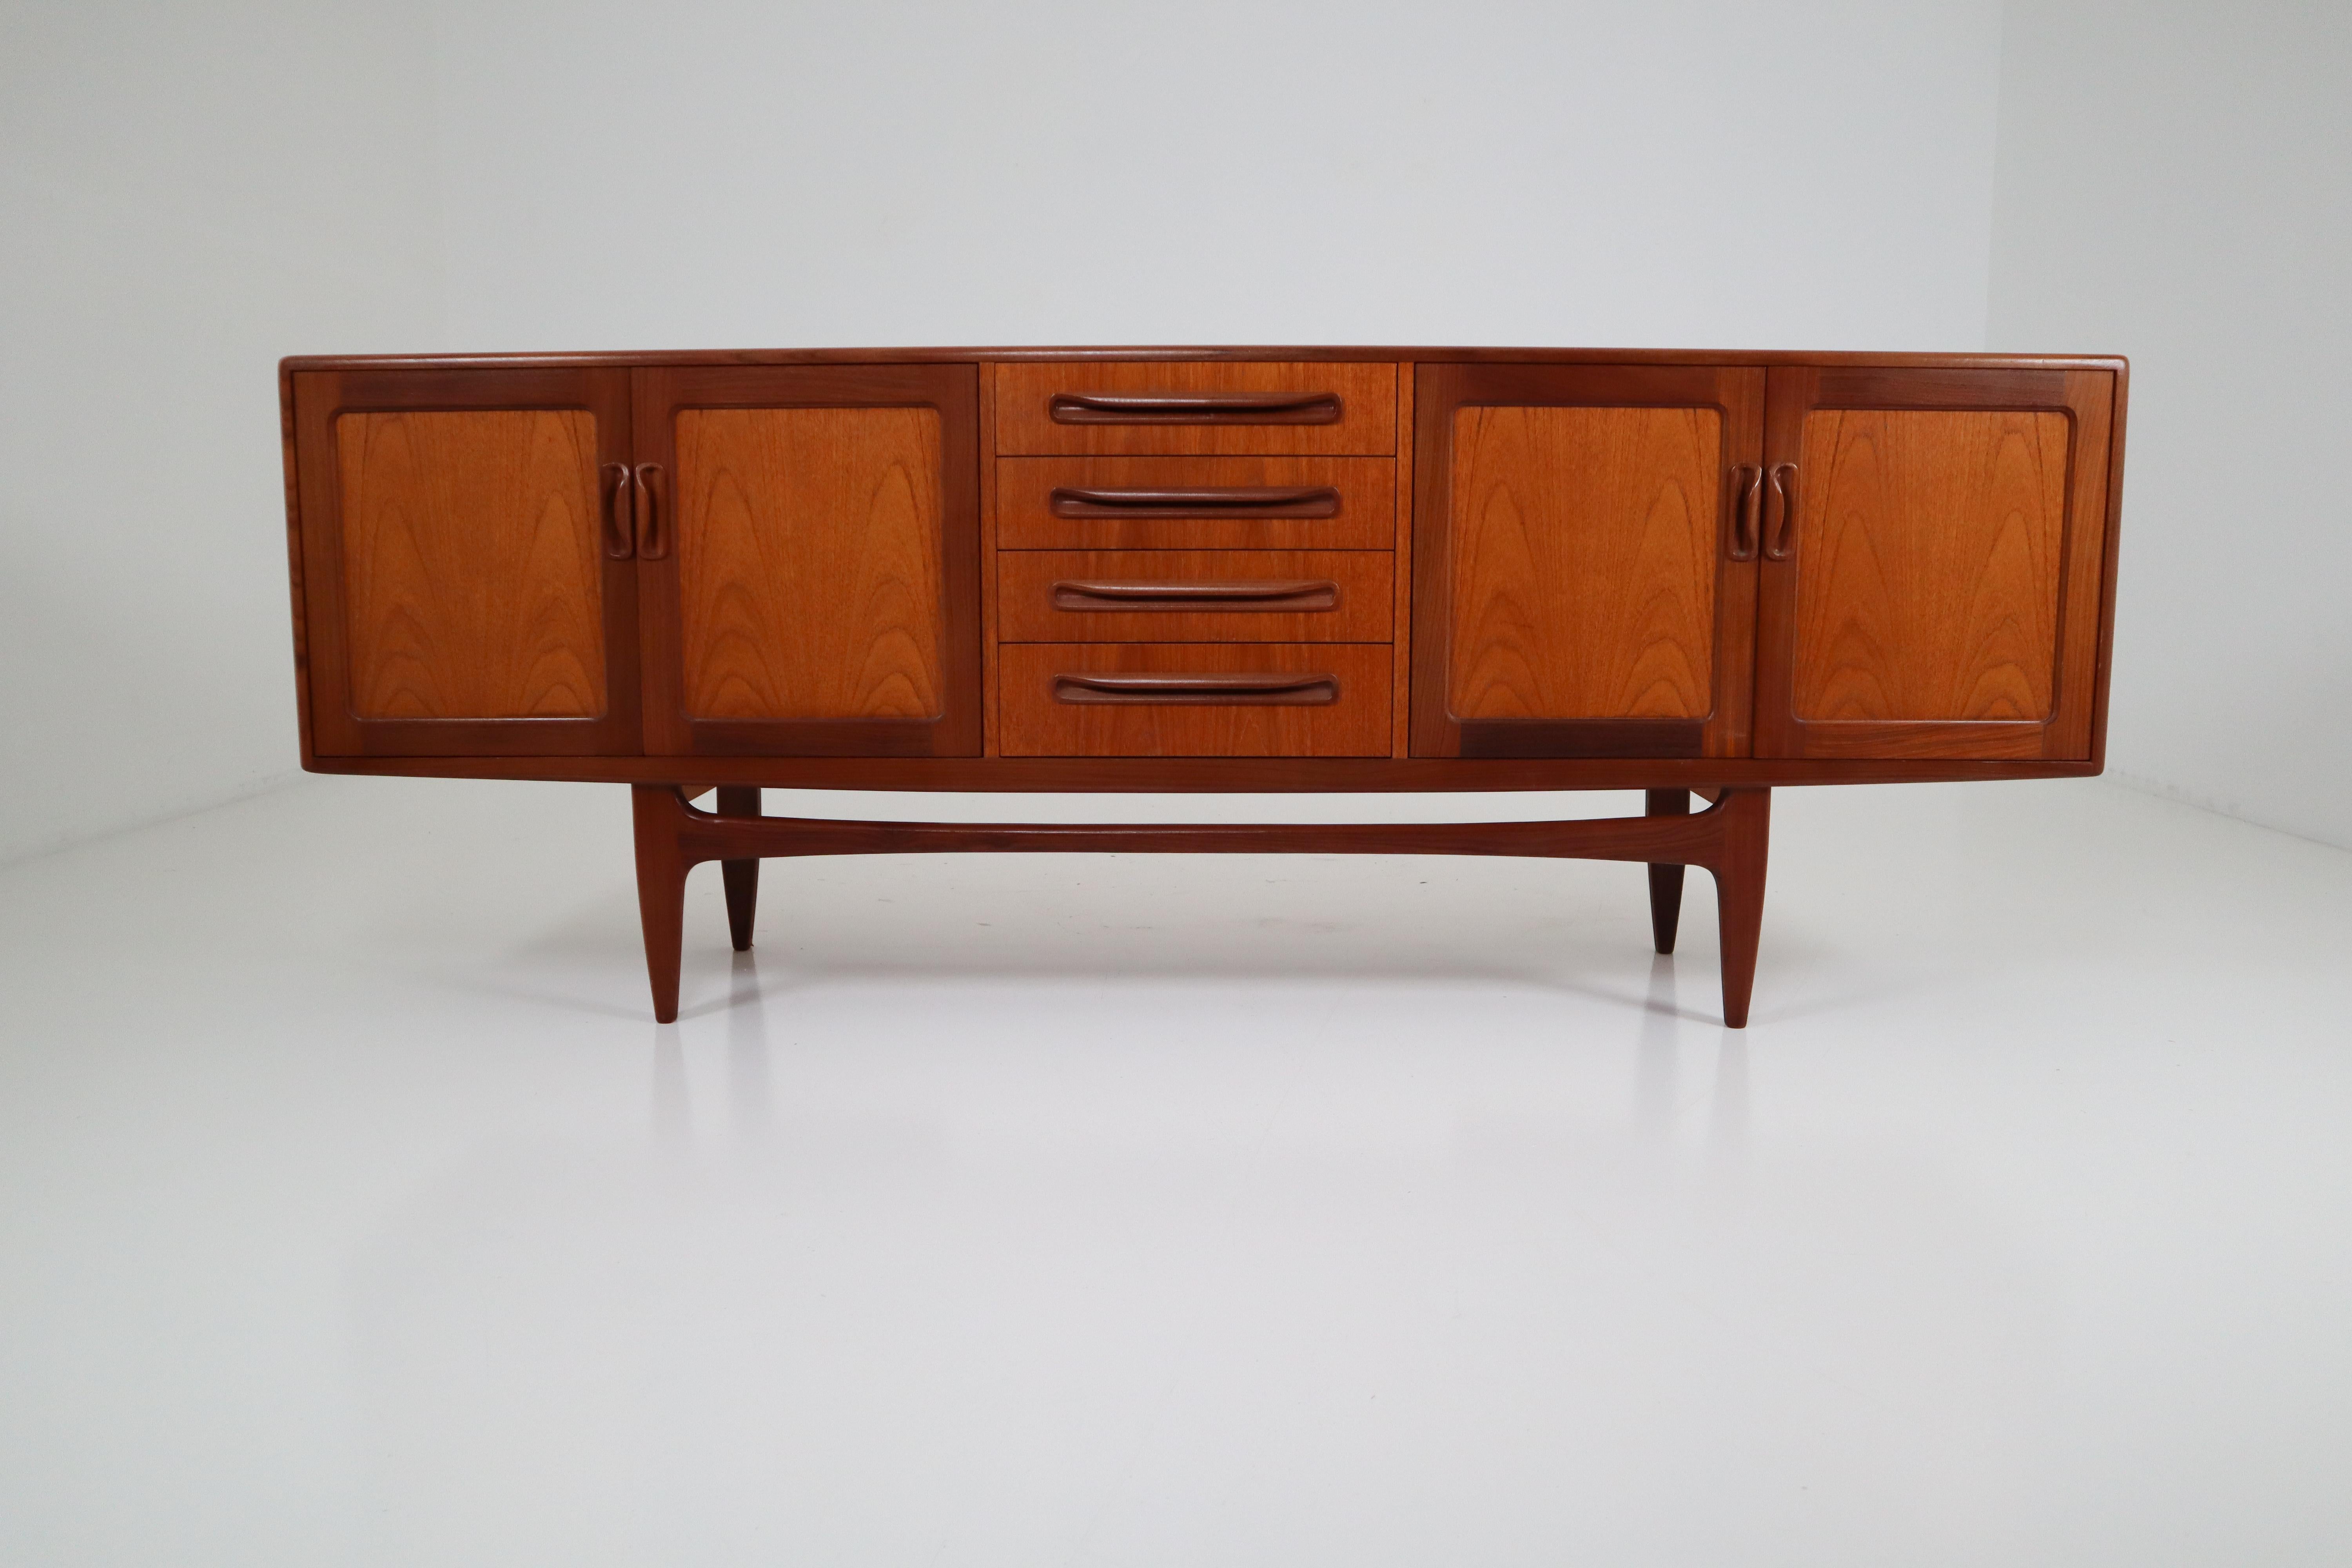 Mid-Century Modern credenza teak wood construction, dovetail drawers. Featuring 4 drawers centre with top silverware drawer, 4 doors with shelf and amazing sculptural hand pulls. Beautiful bookmatched figured wood. The sideboard has a nice patina